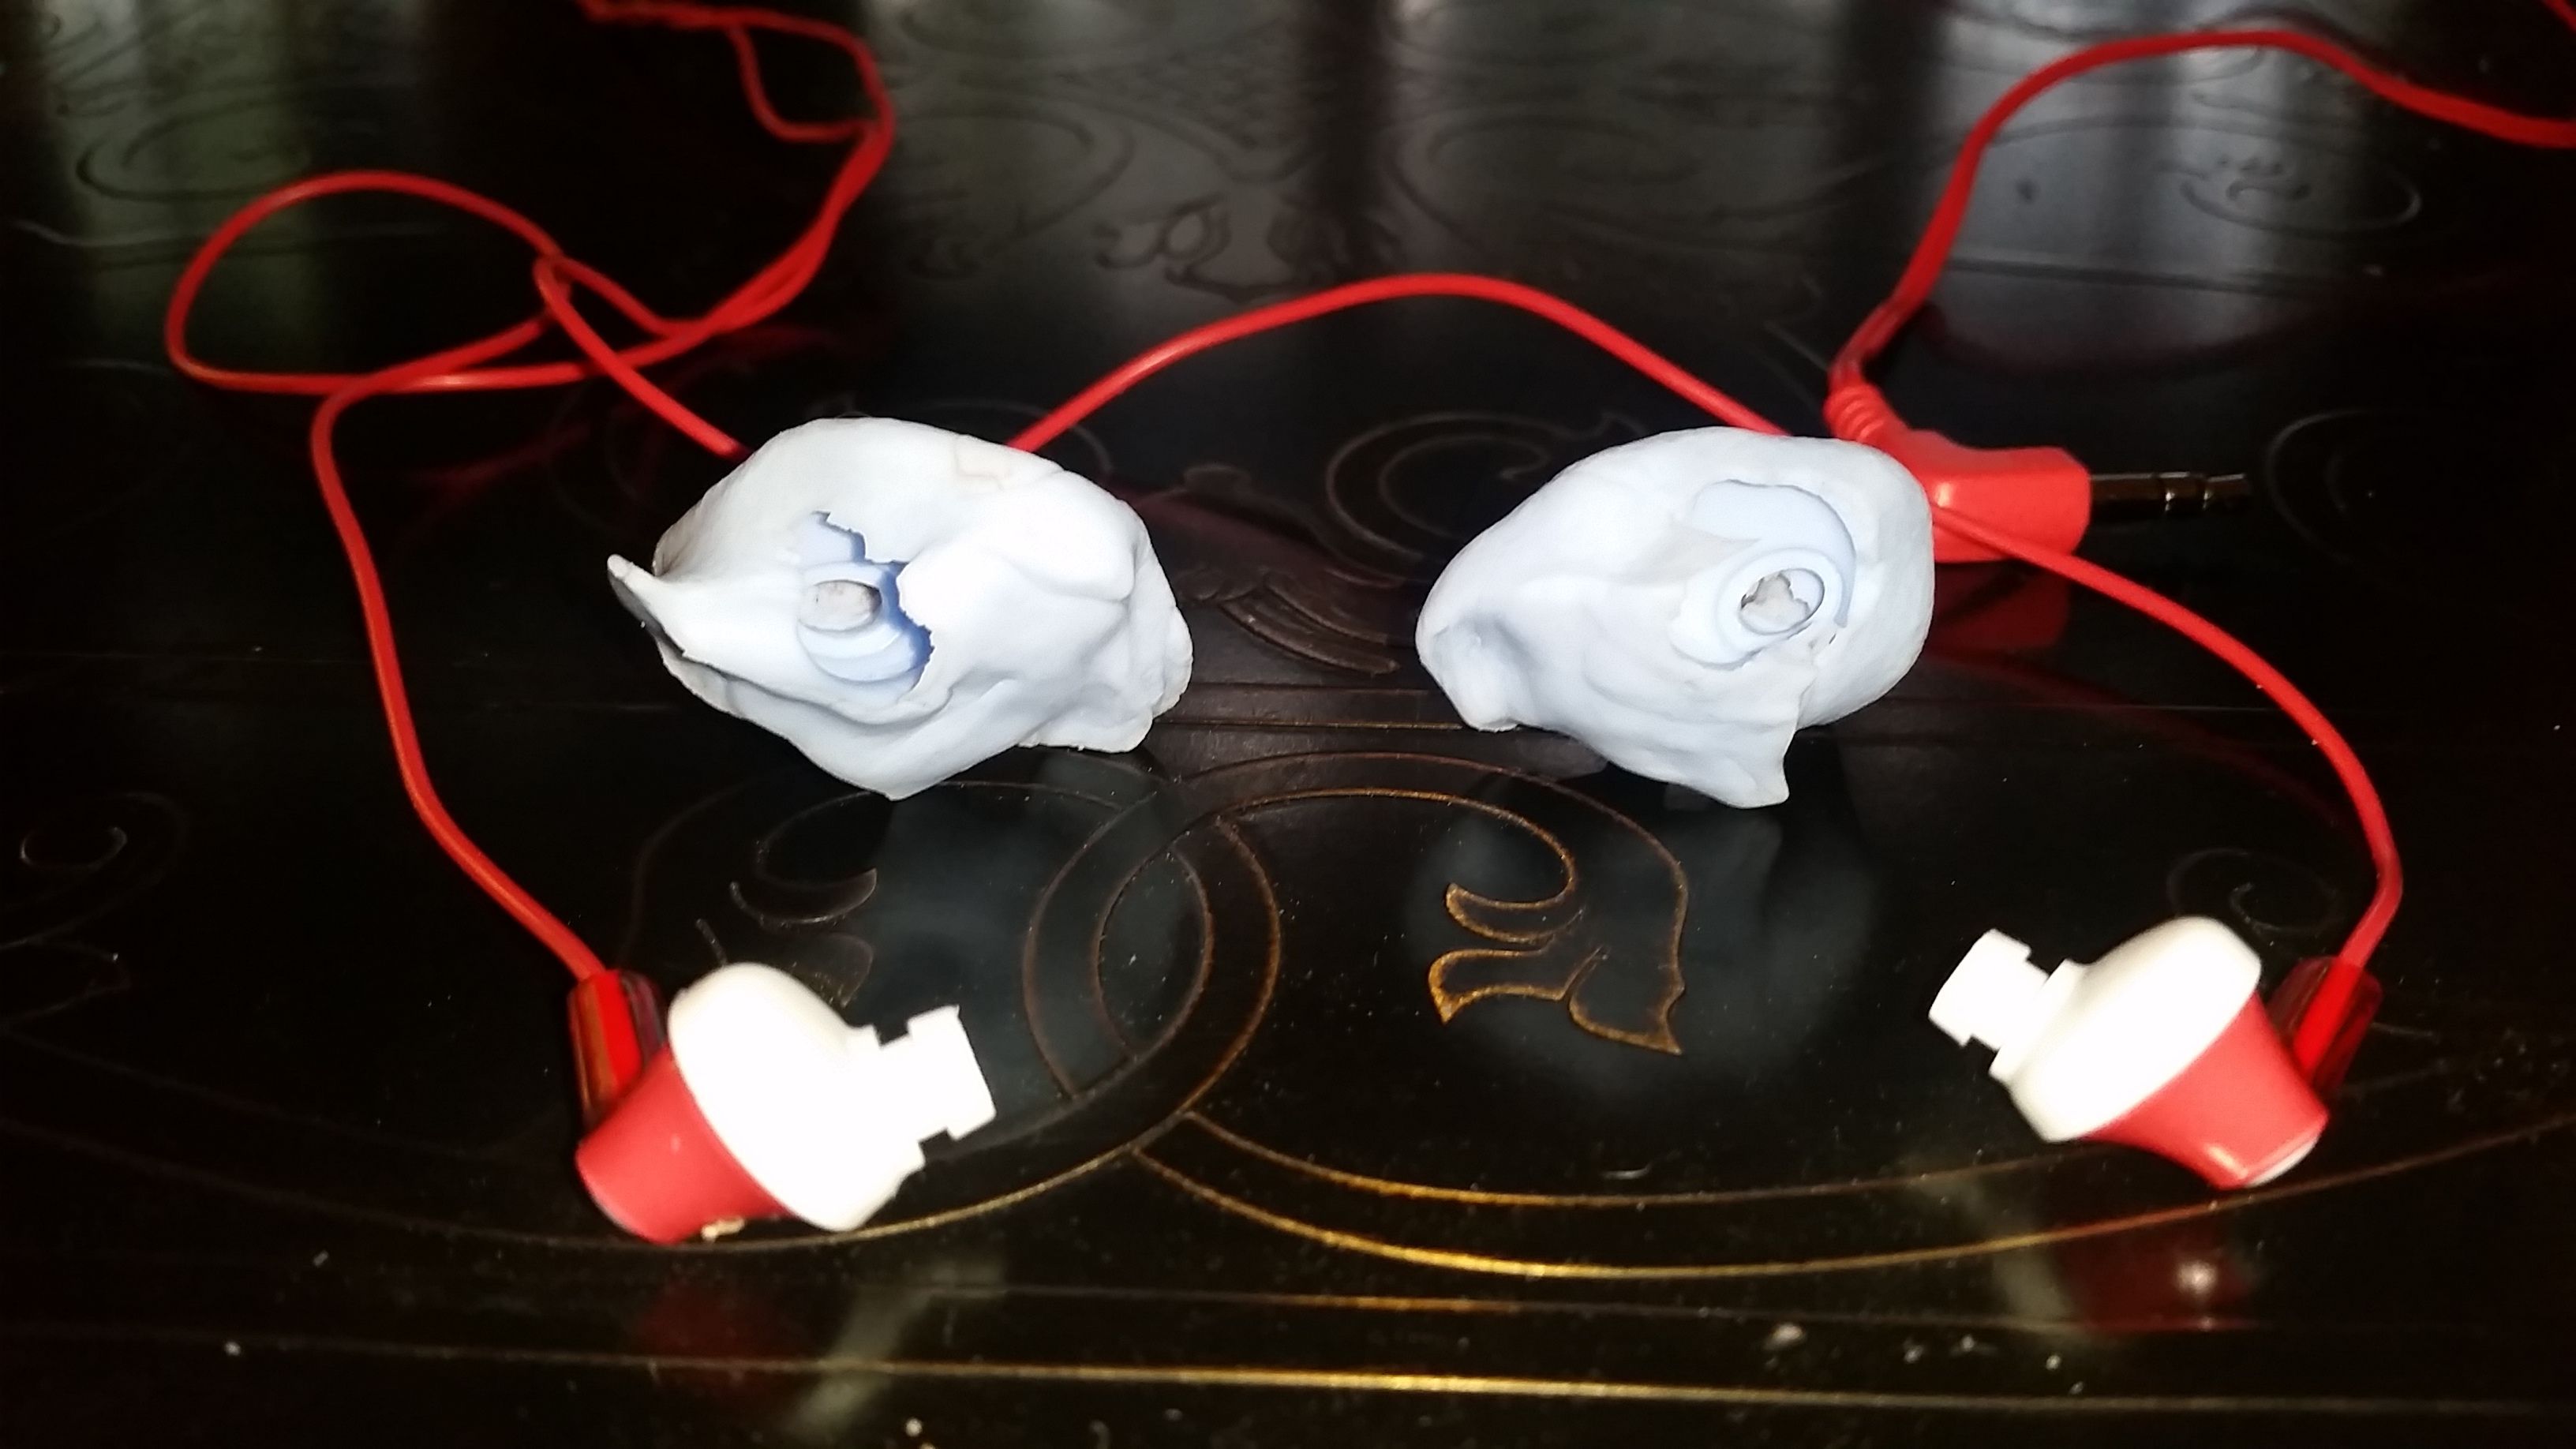 after removing the earbuds, you can see how another pair of the same route can be inserted as needed